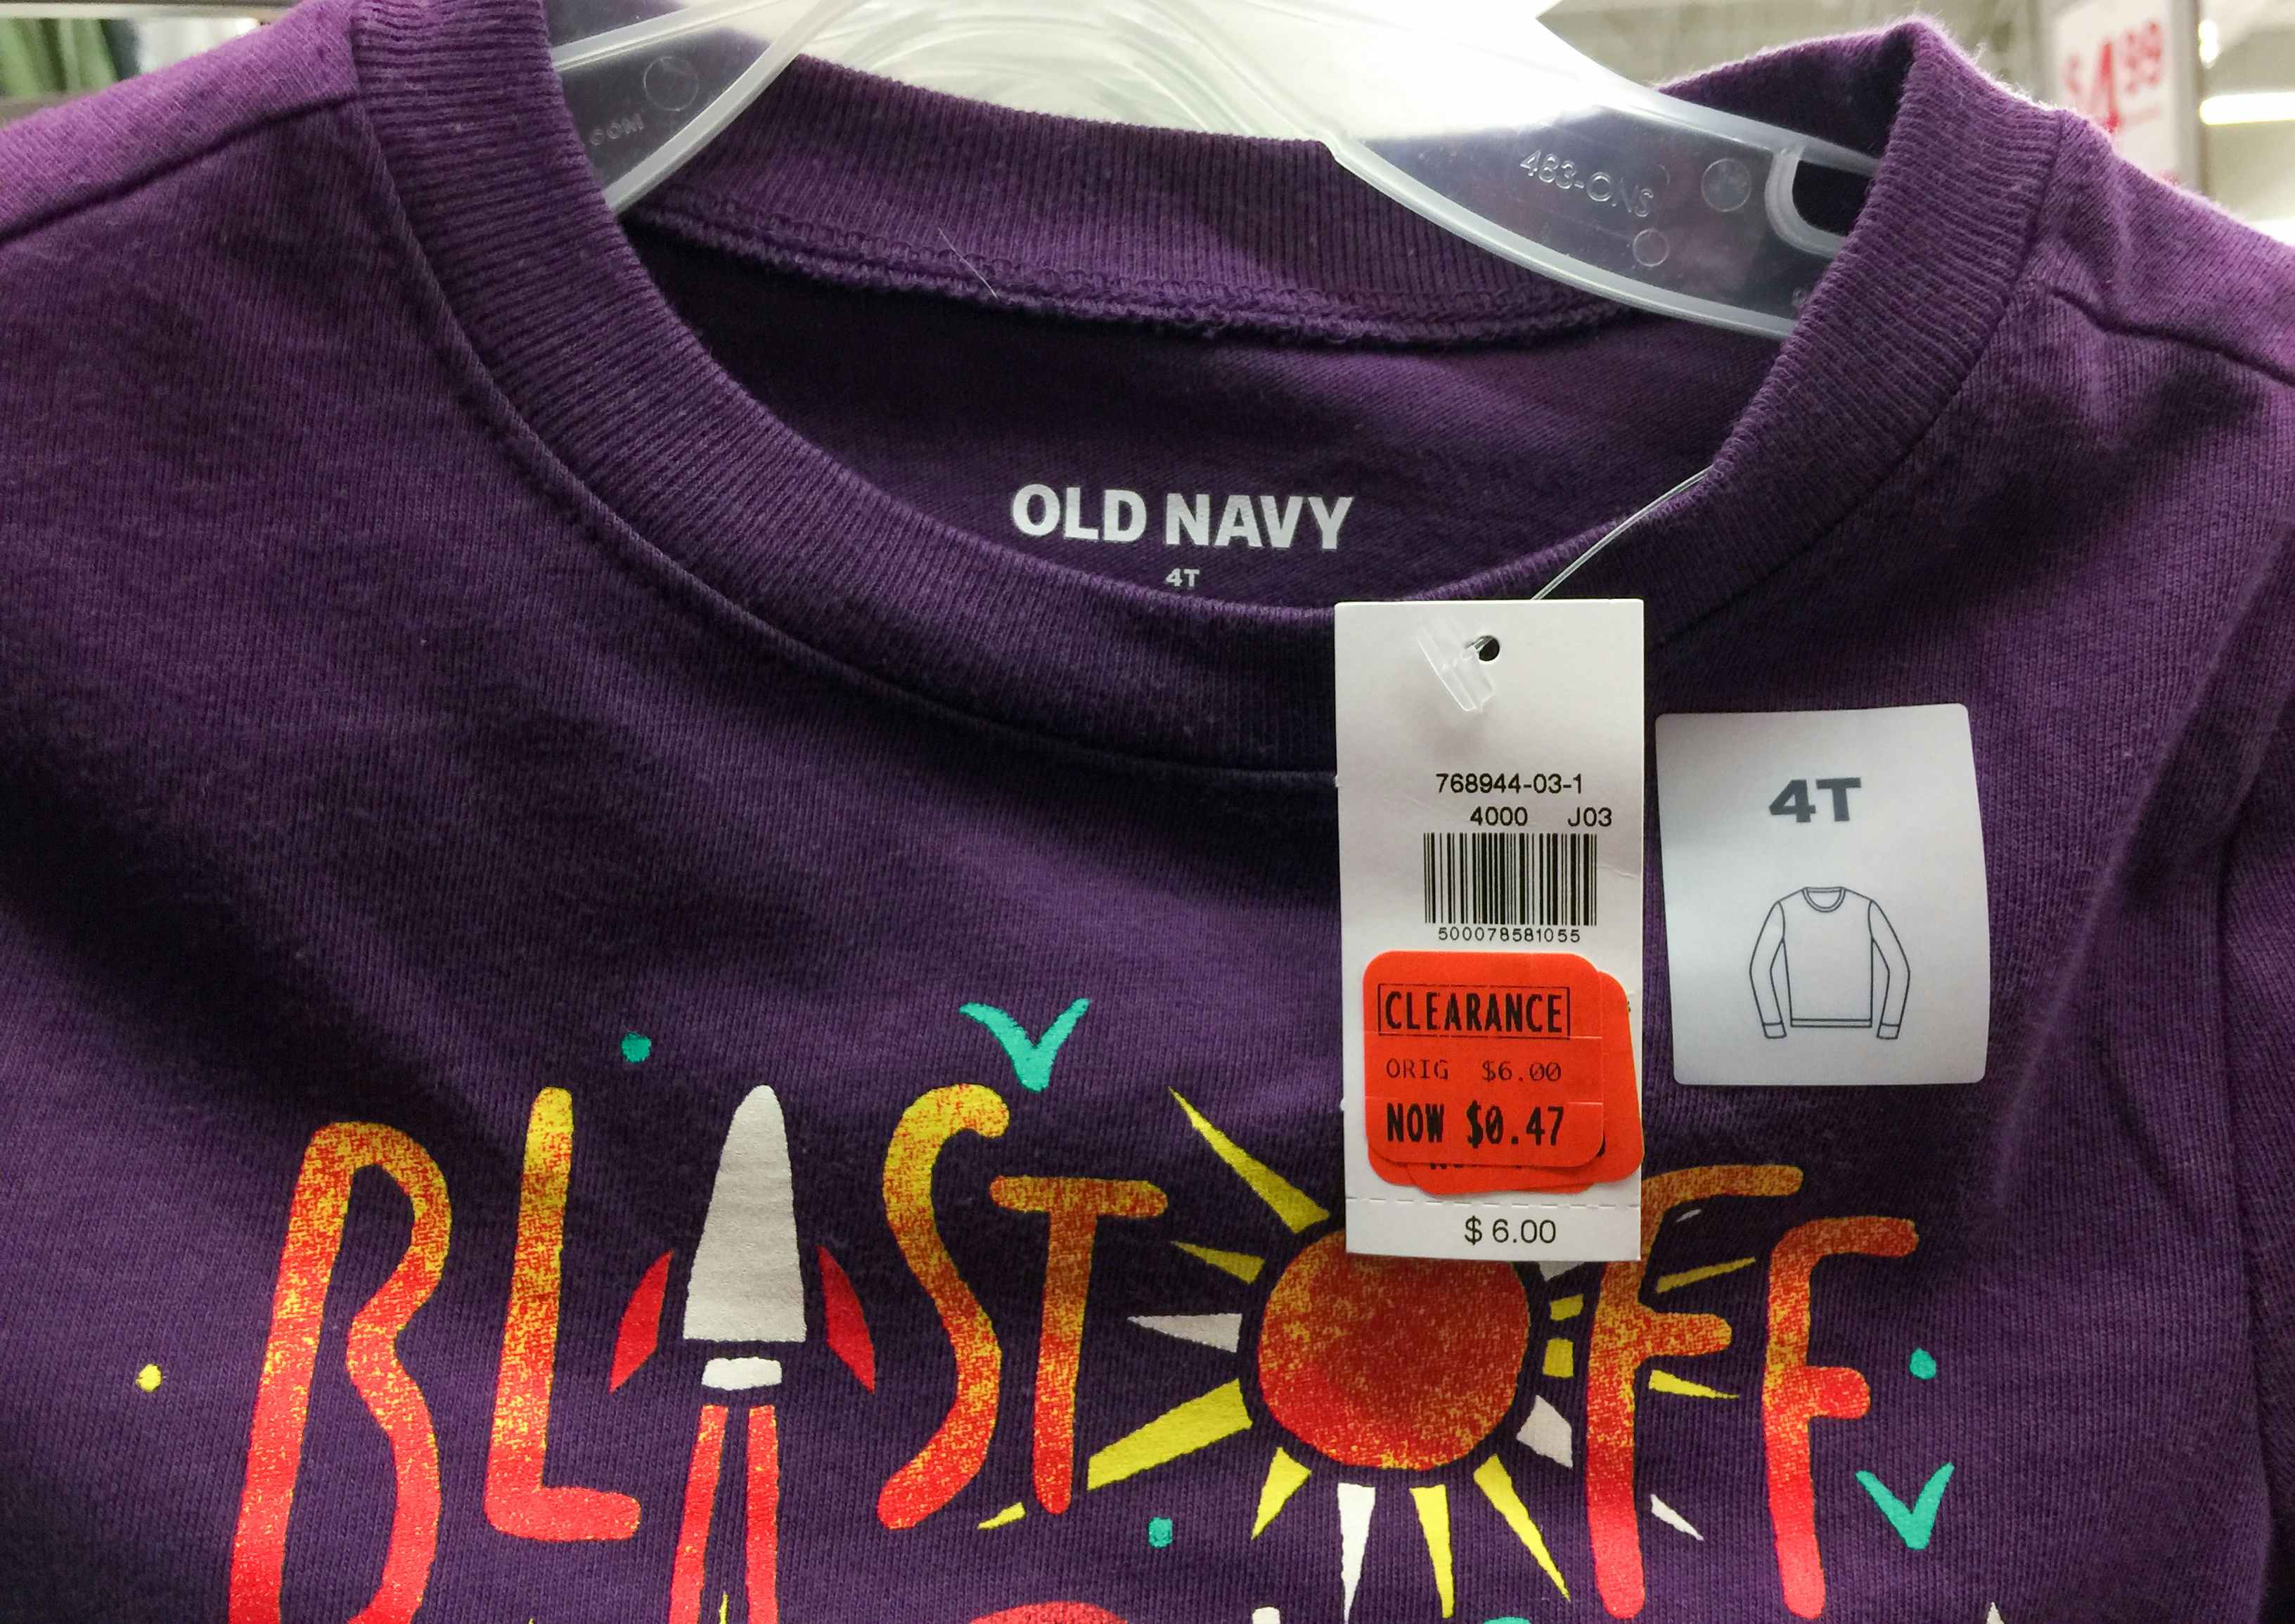 A close-up of a child's shirt on a hanger with a clearance sticker on its price tag inside Old Navy.